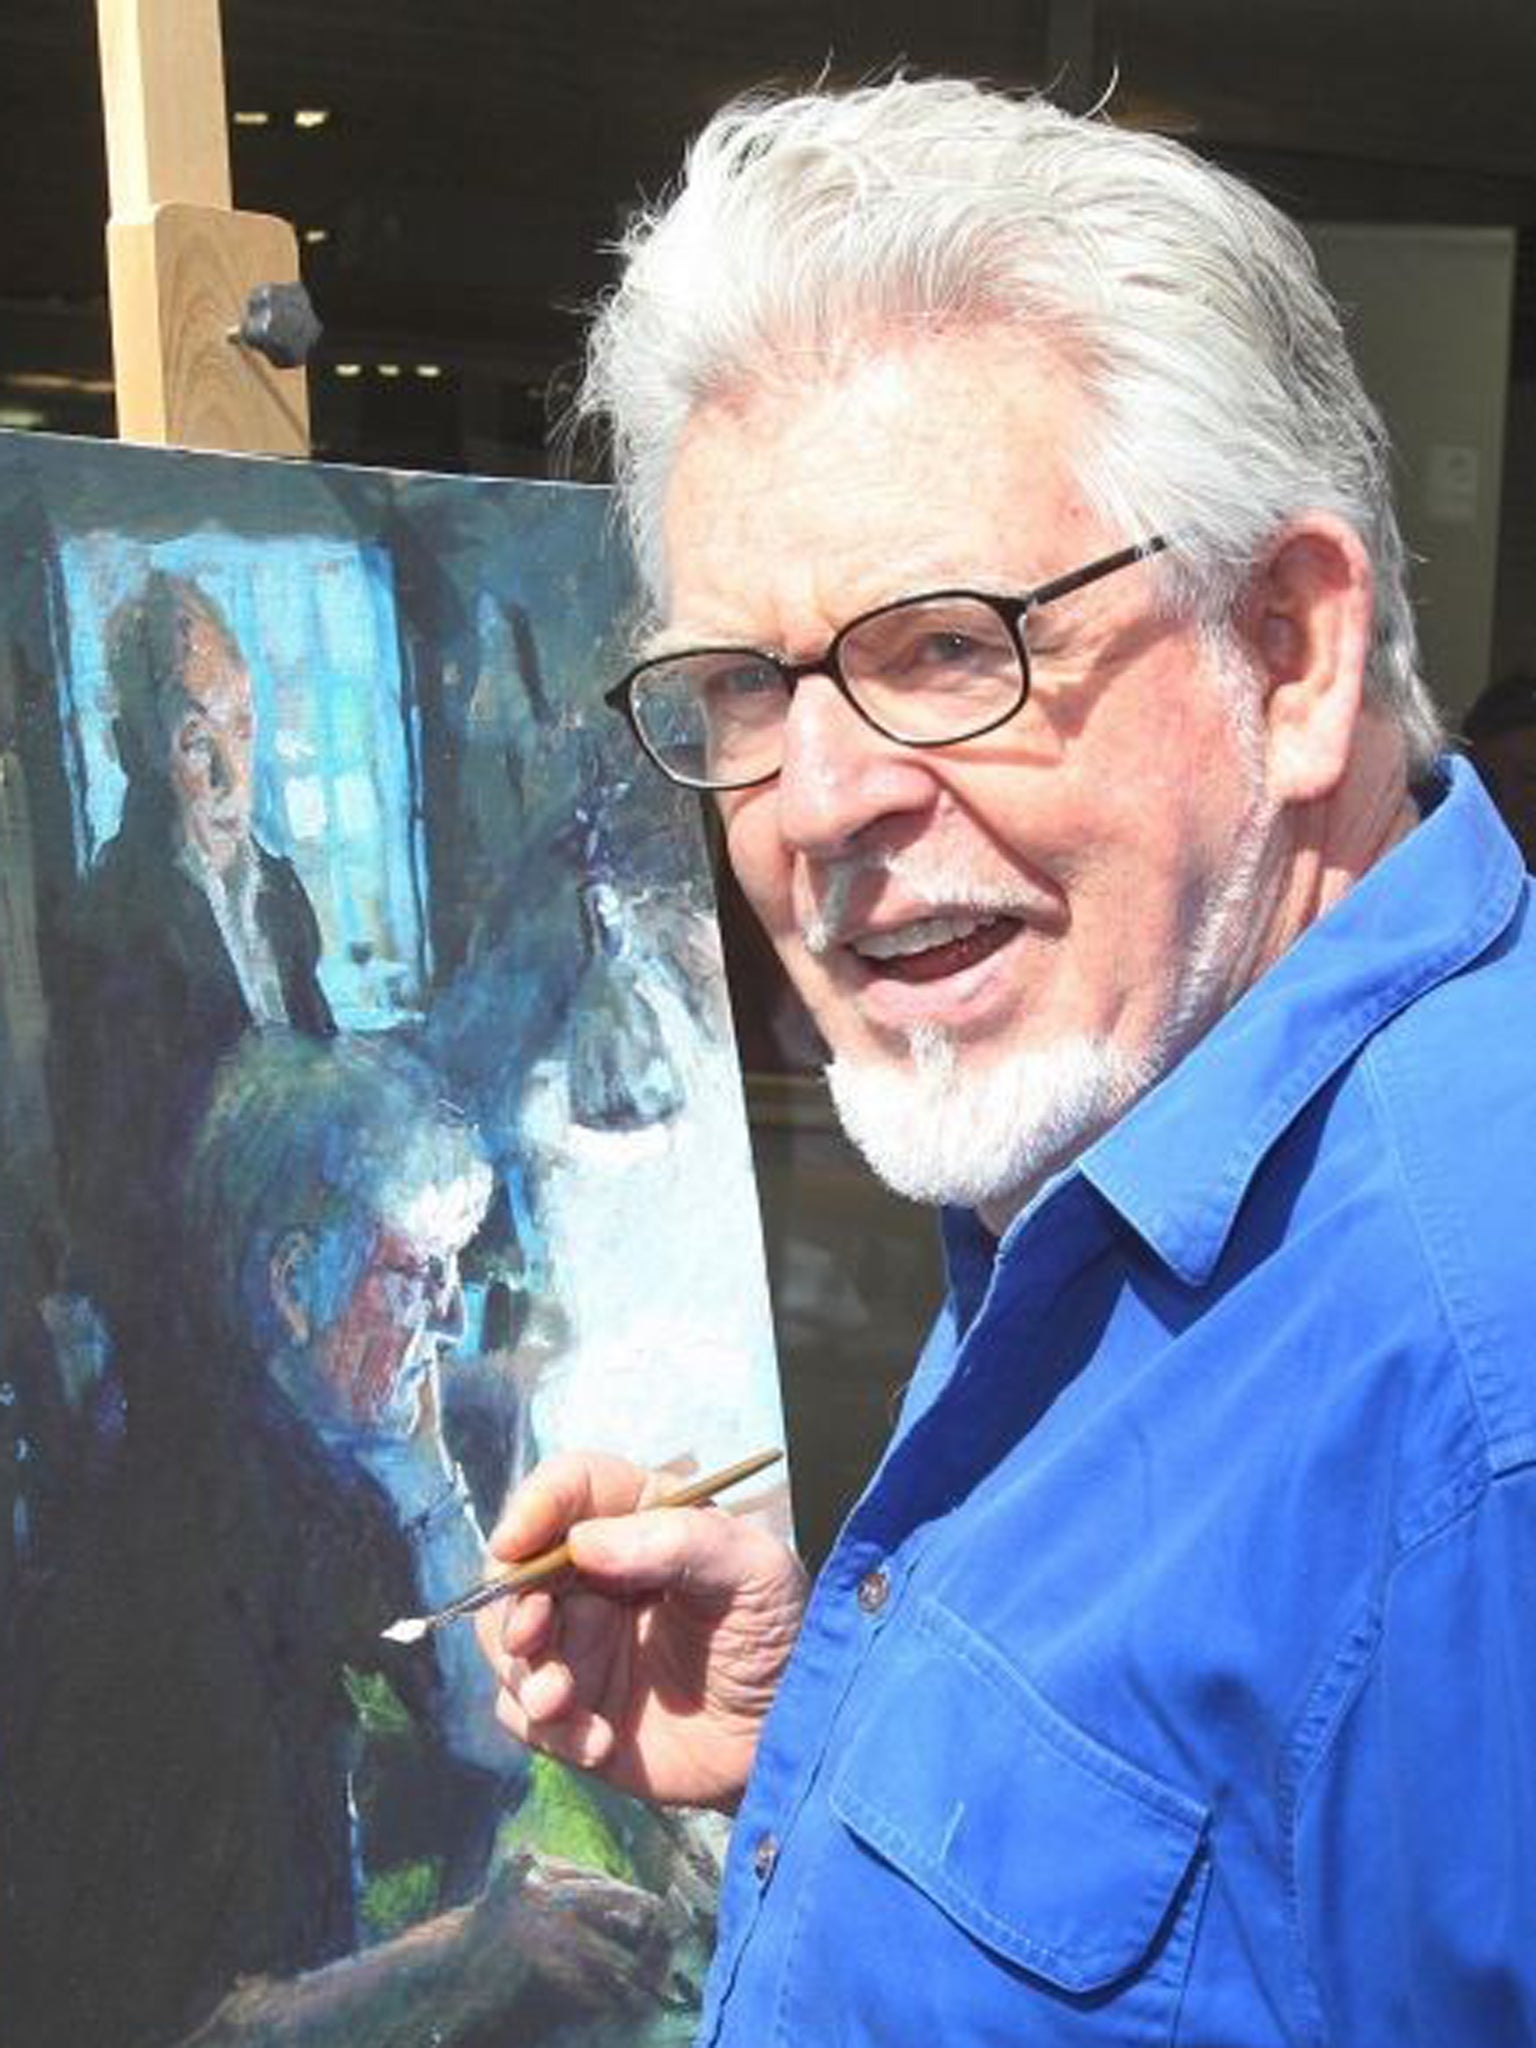 Rolf Harris was first held in November on suspicion of sexual offences by detectives from Operation Yewtree